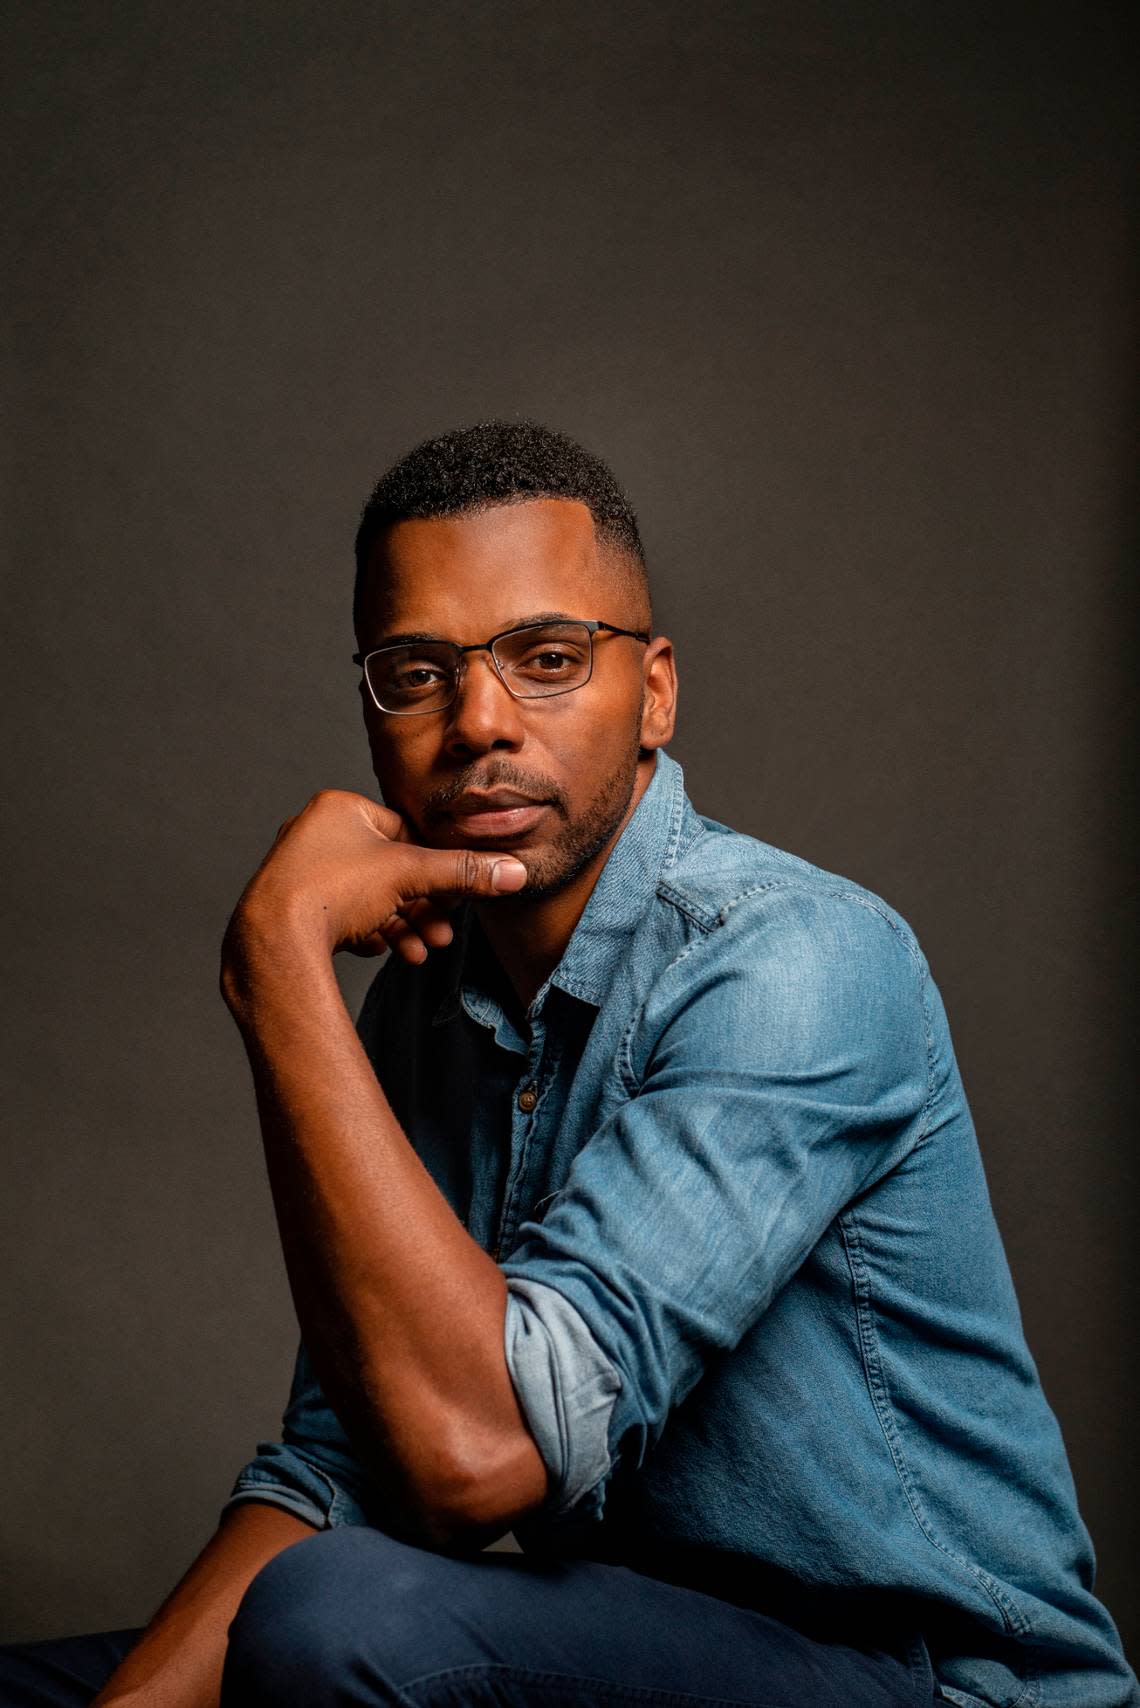 Jermaine Fowler, author of the bestseller “The Humanity Archive: Recovering the Soul of Black History From a Whitewashed American Myth,” will give the Heartland Book Festival’s keynote address at 7 p.m. Oct. 6 at the Folly Theater.